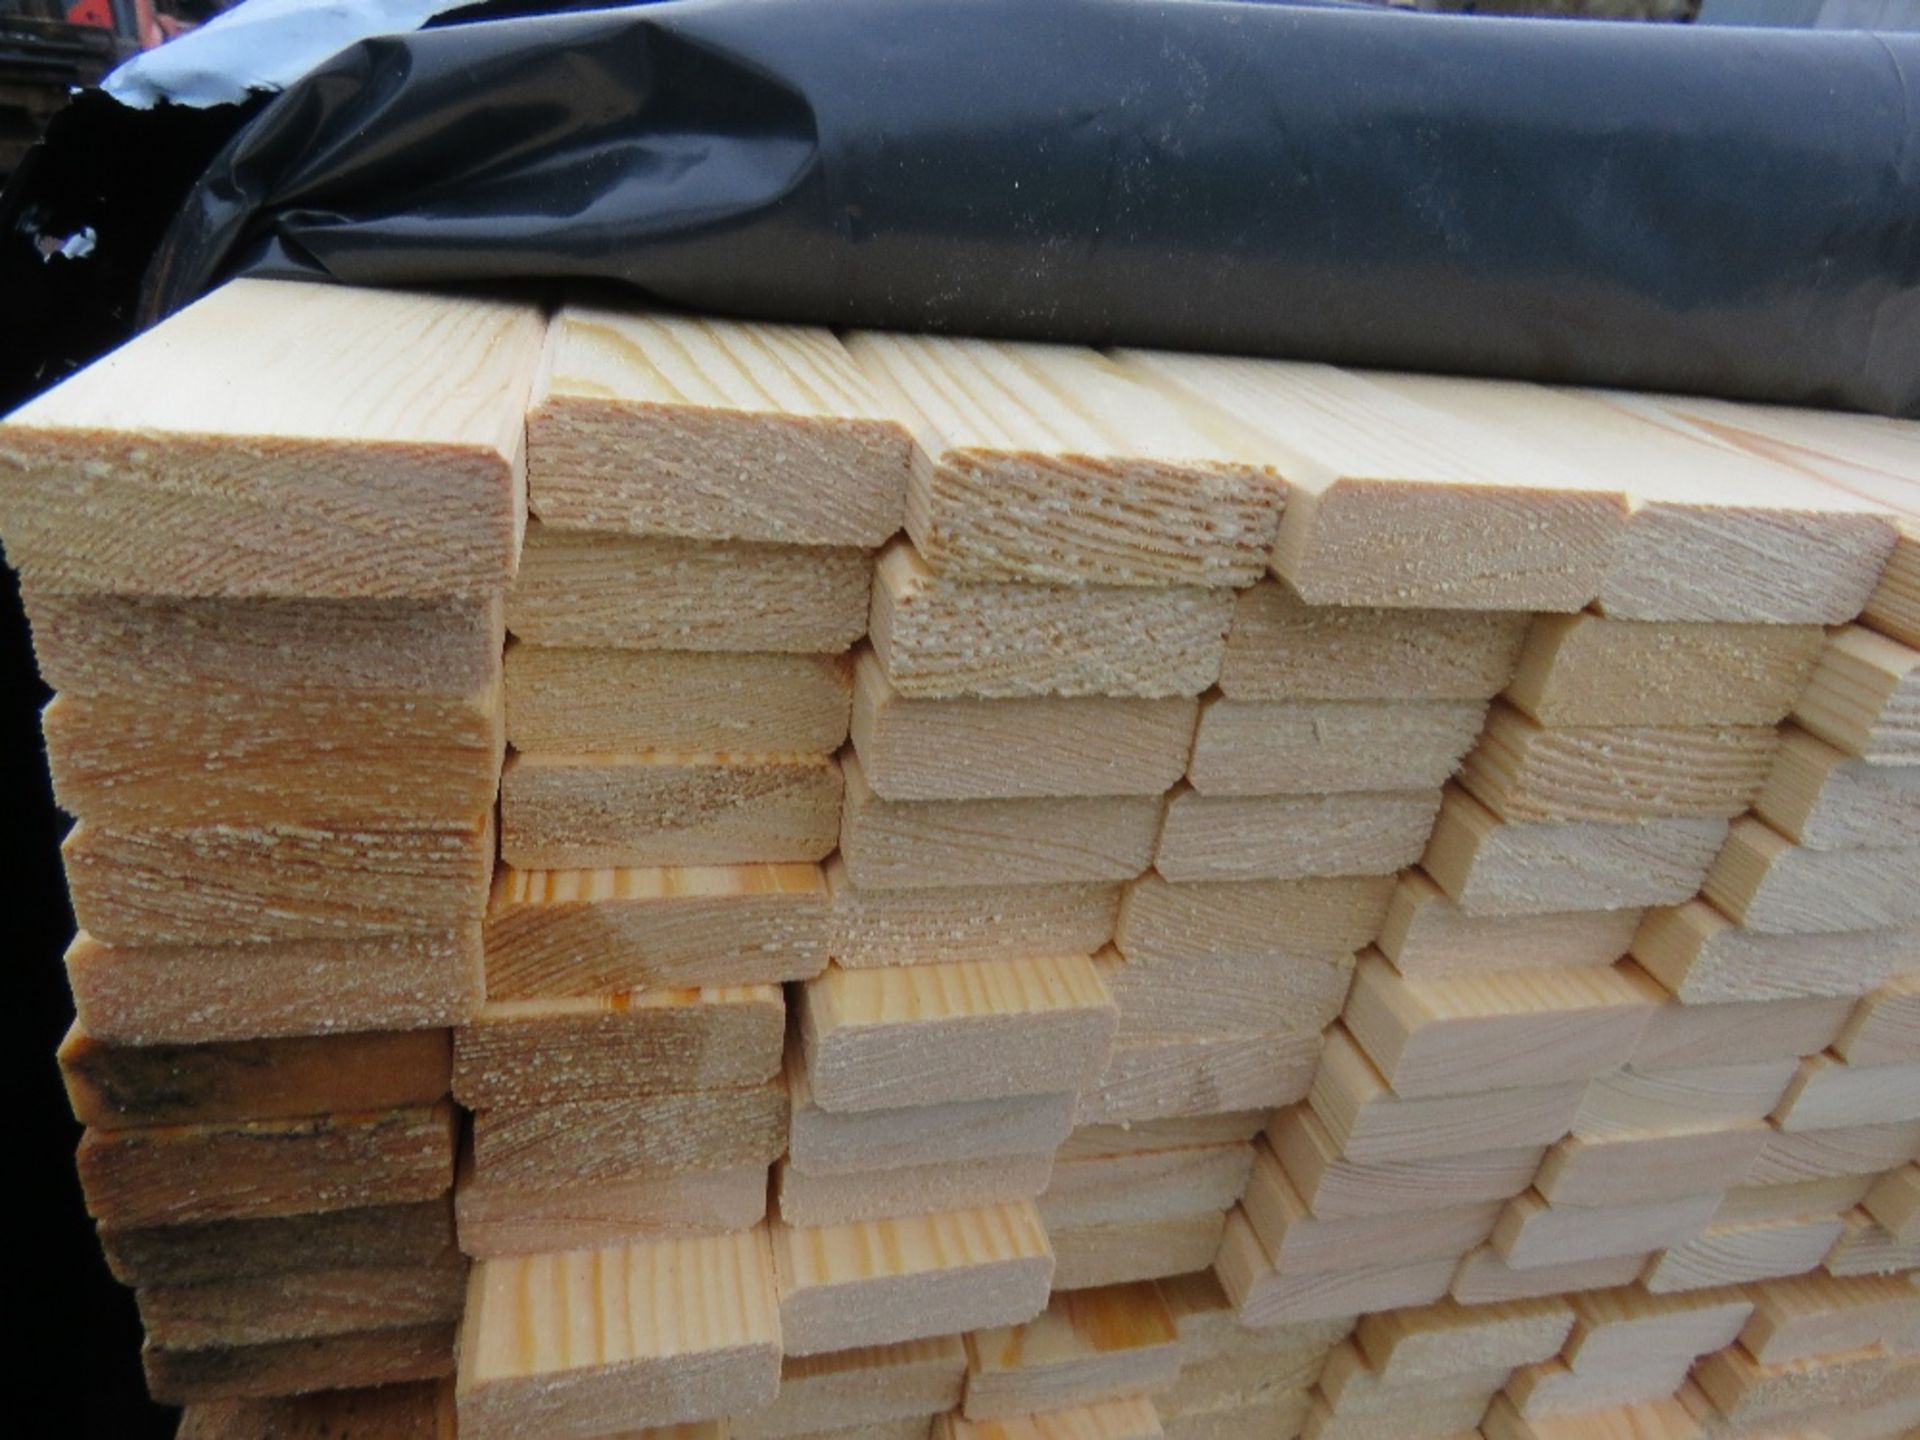 EXTRA LARGE PACK OF UNTREATED VENETIAN PALE/TRELLIS SLATS: 45MM X 17MM X 1.83M LENGTH APPROX. - Image 3 of 3